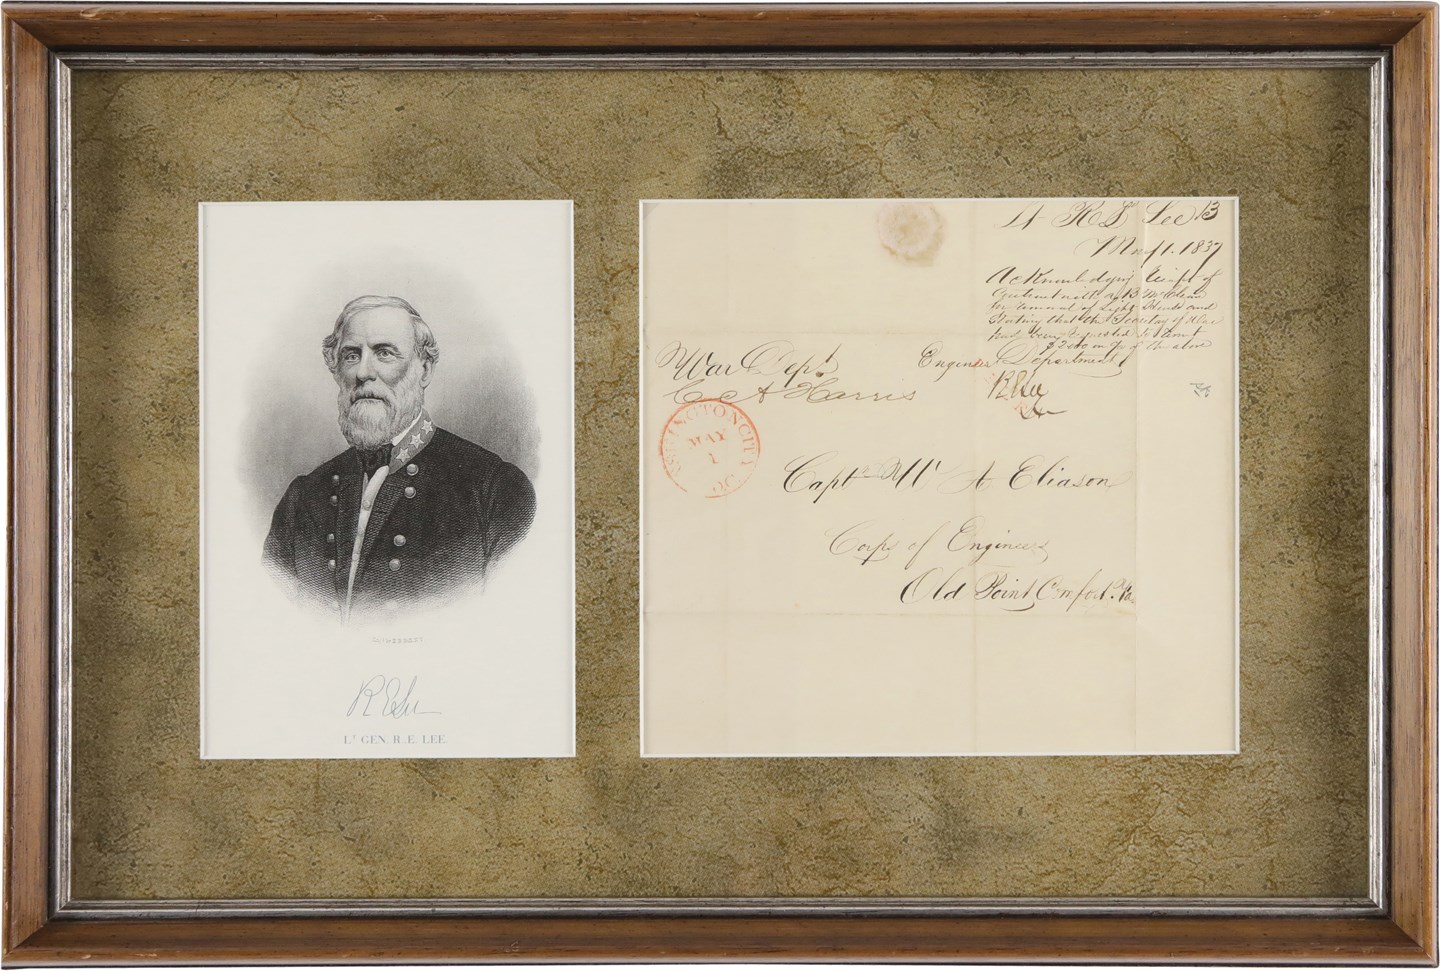 - 1837 Robert E. Lee Signed and Hand Addressed Free Frank Envelope to Army Captain (PSA)